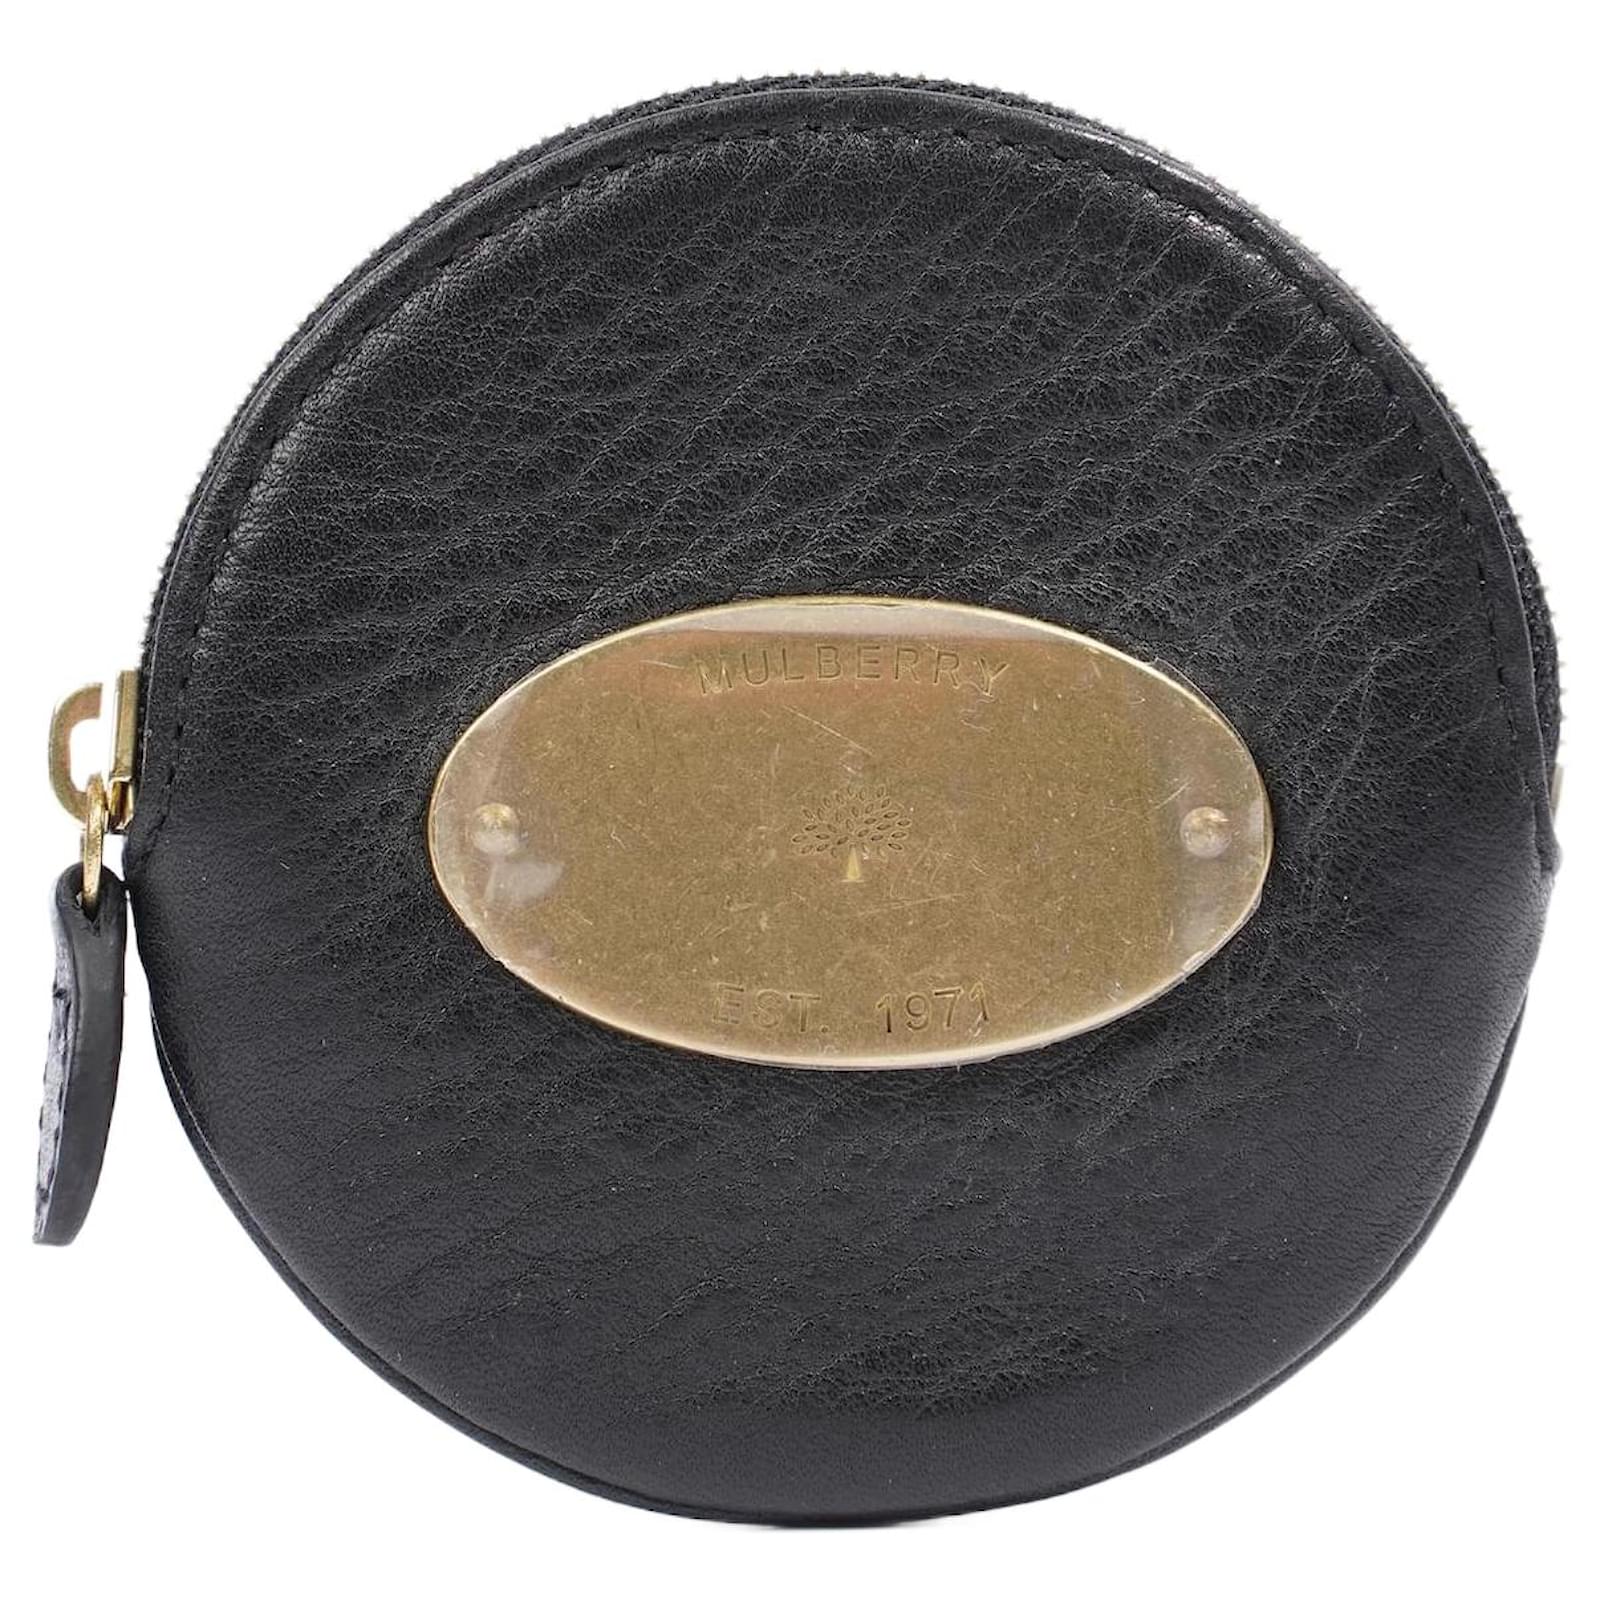 Large Zip Coin Purses with Harris Tweed Inspired by Mulberry |  AlyBond.co.uk-Bags & Accessories Recycled Leather